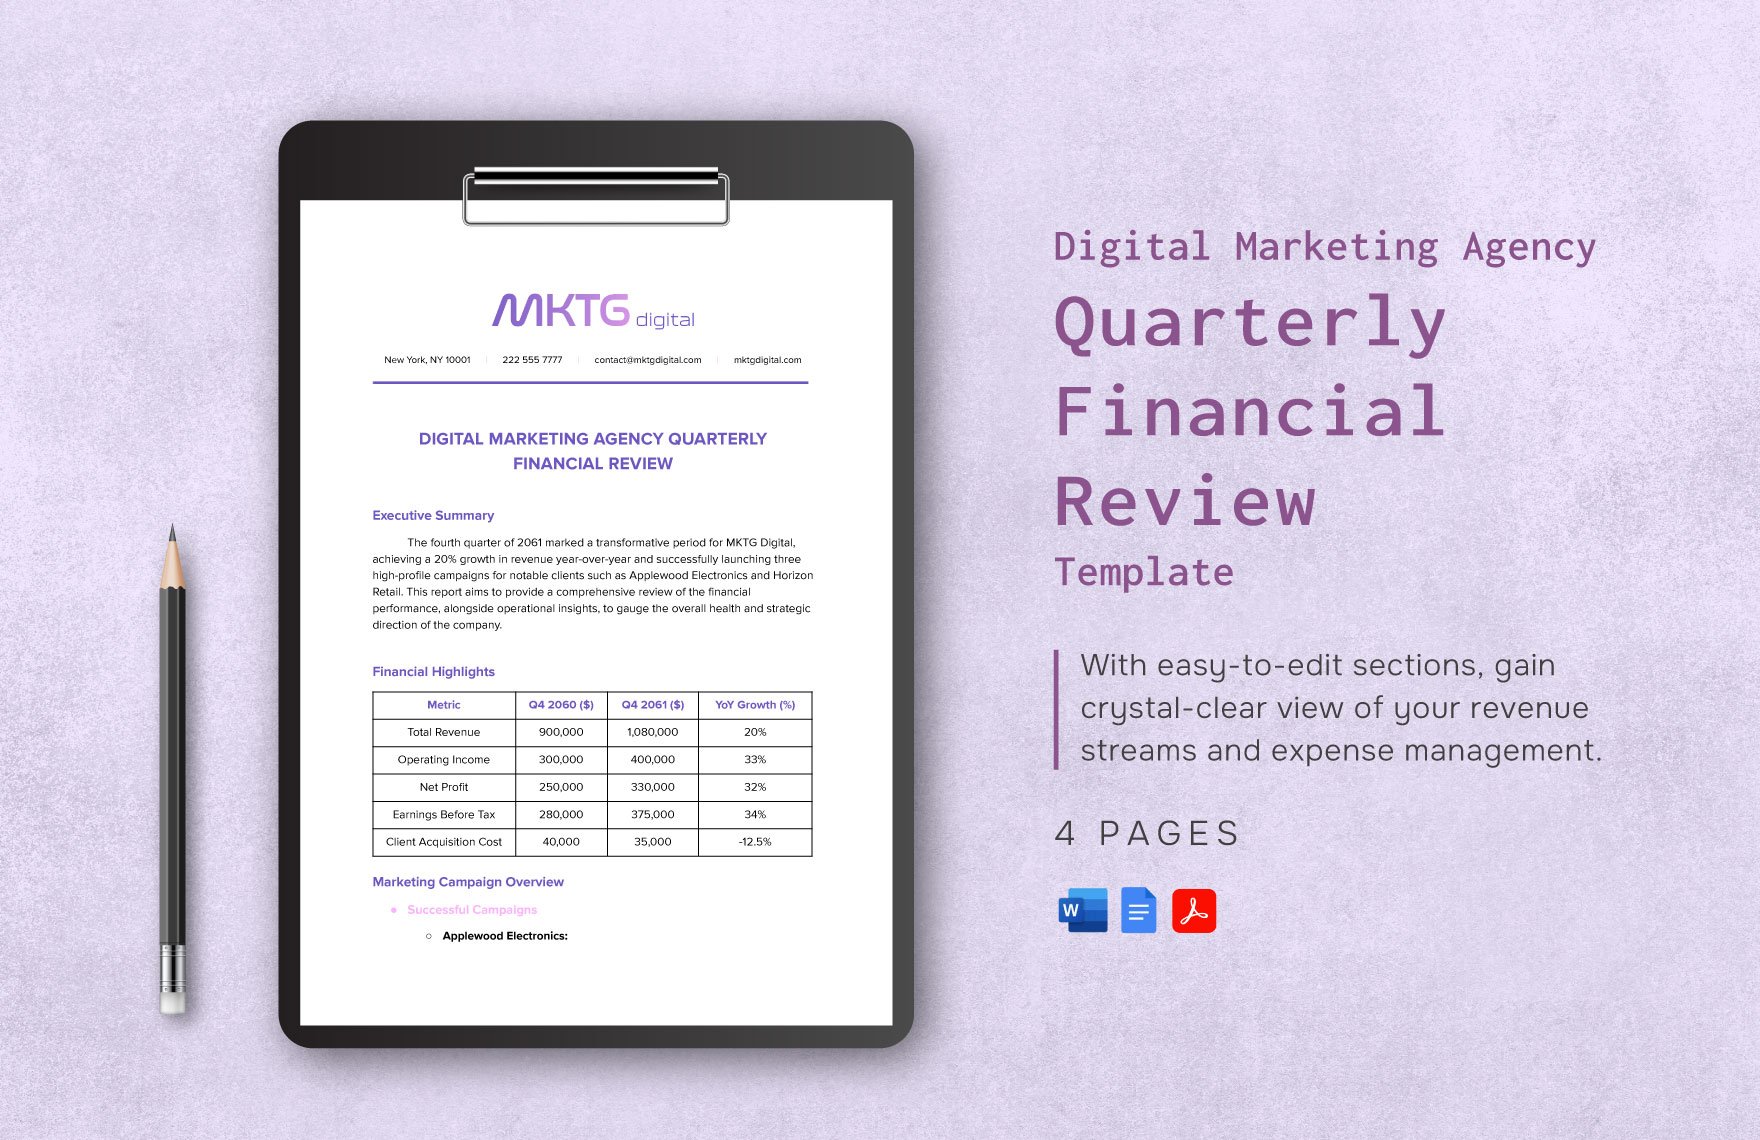 Digital Marketing Agency Quarterly Financial Review Template in Word, Google Docs, PDF